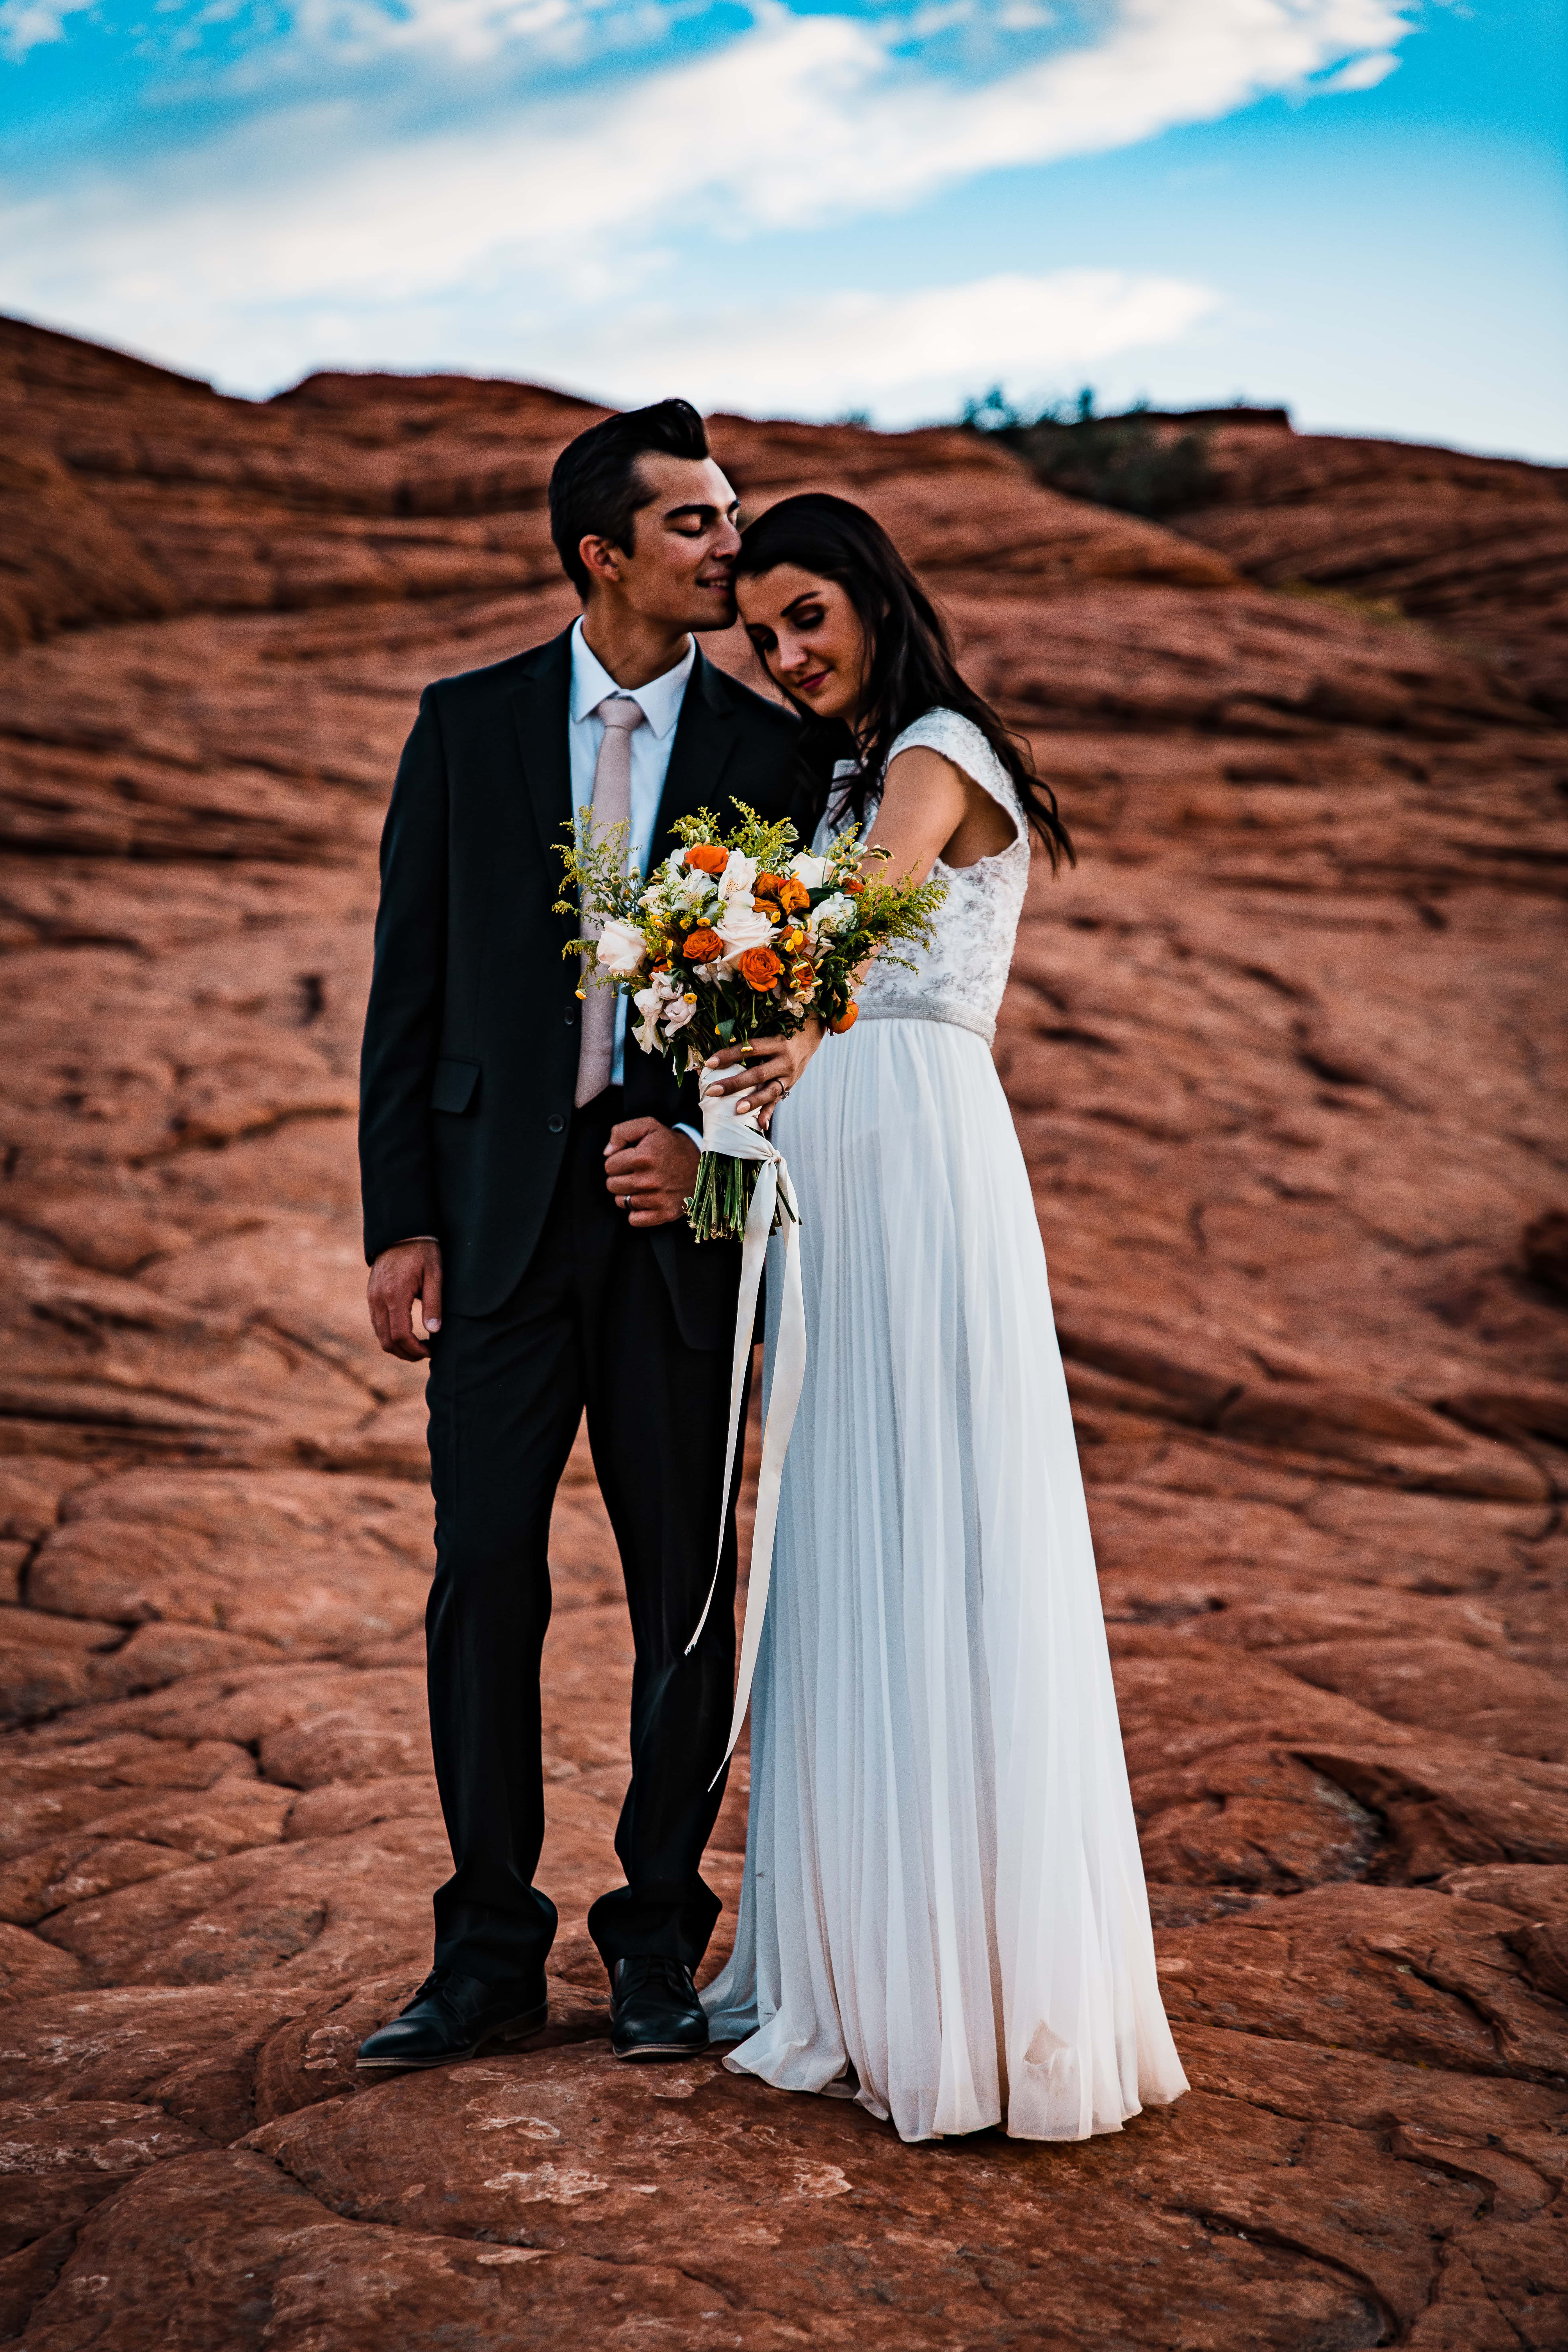 A newly eloped couple embraces with a wedding bouquet in southern Utah's red rocks.